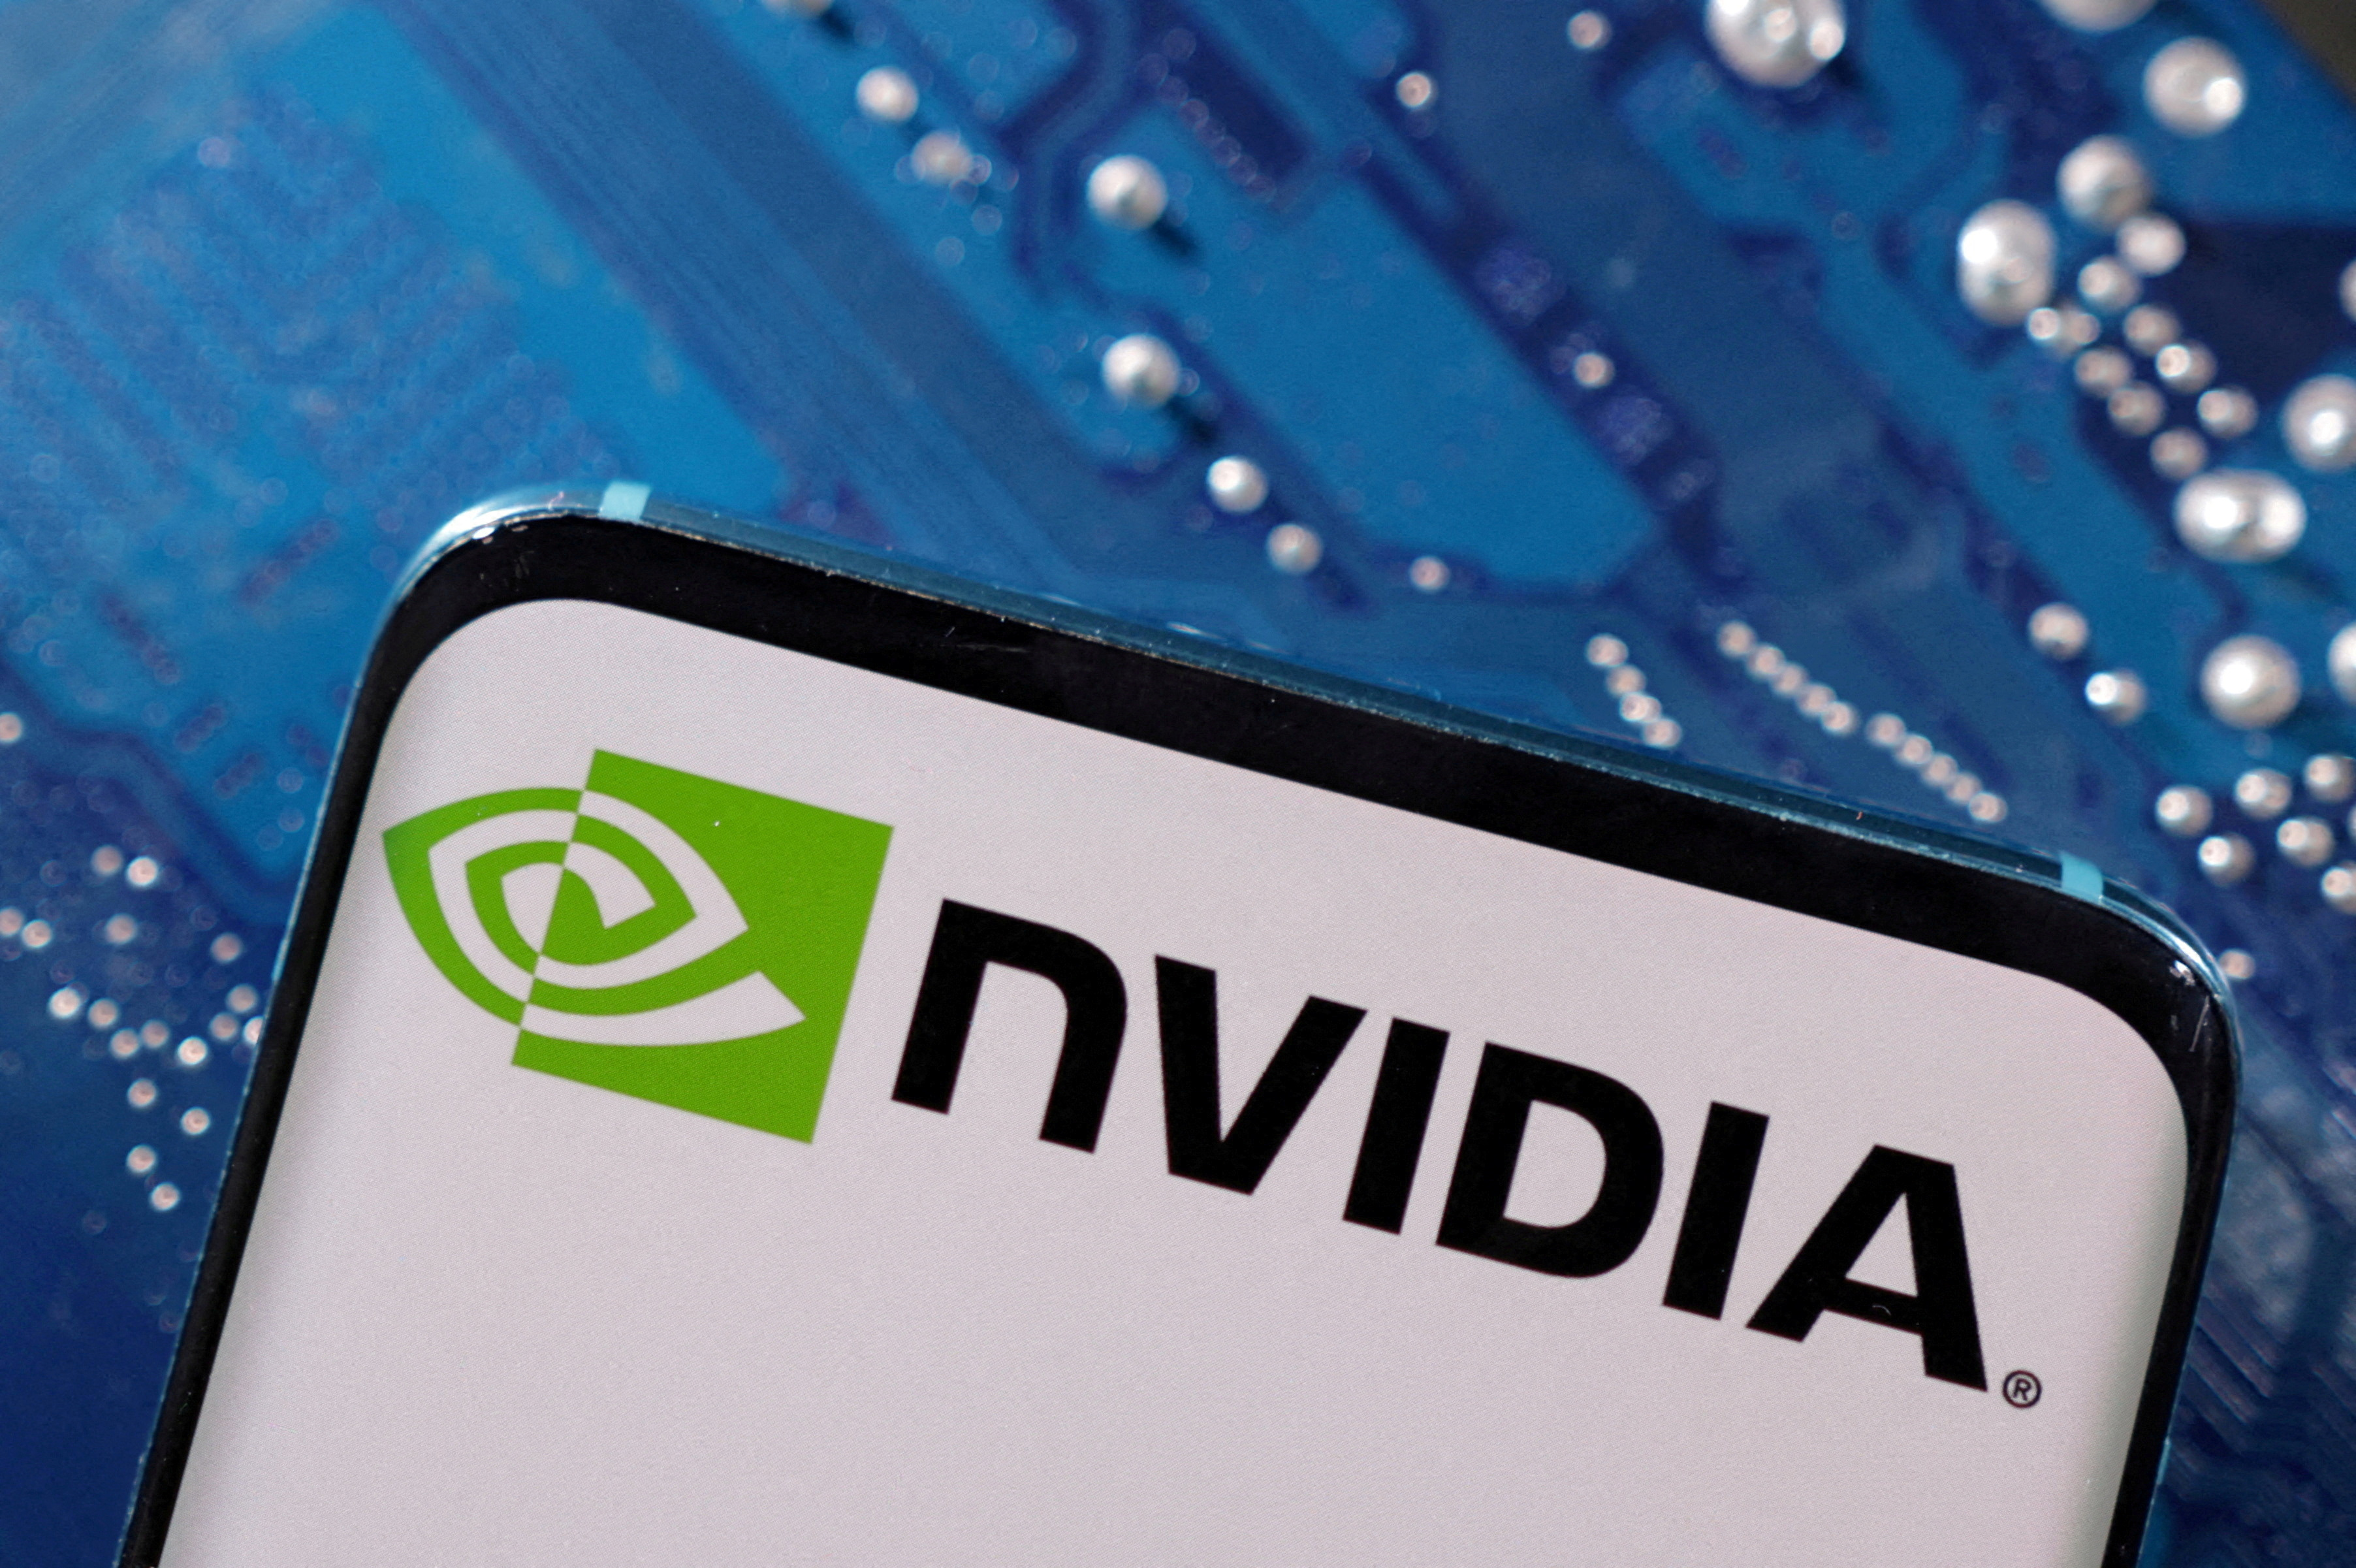 Nvidia launches new gaming chip for China to comply with U.S.